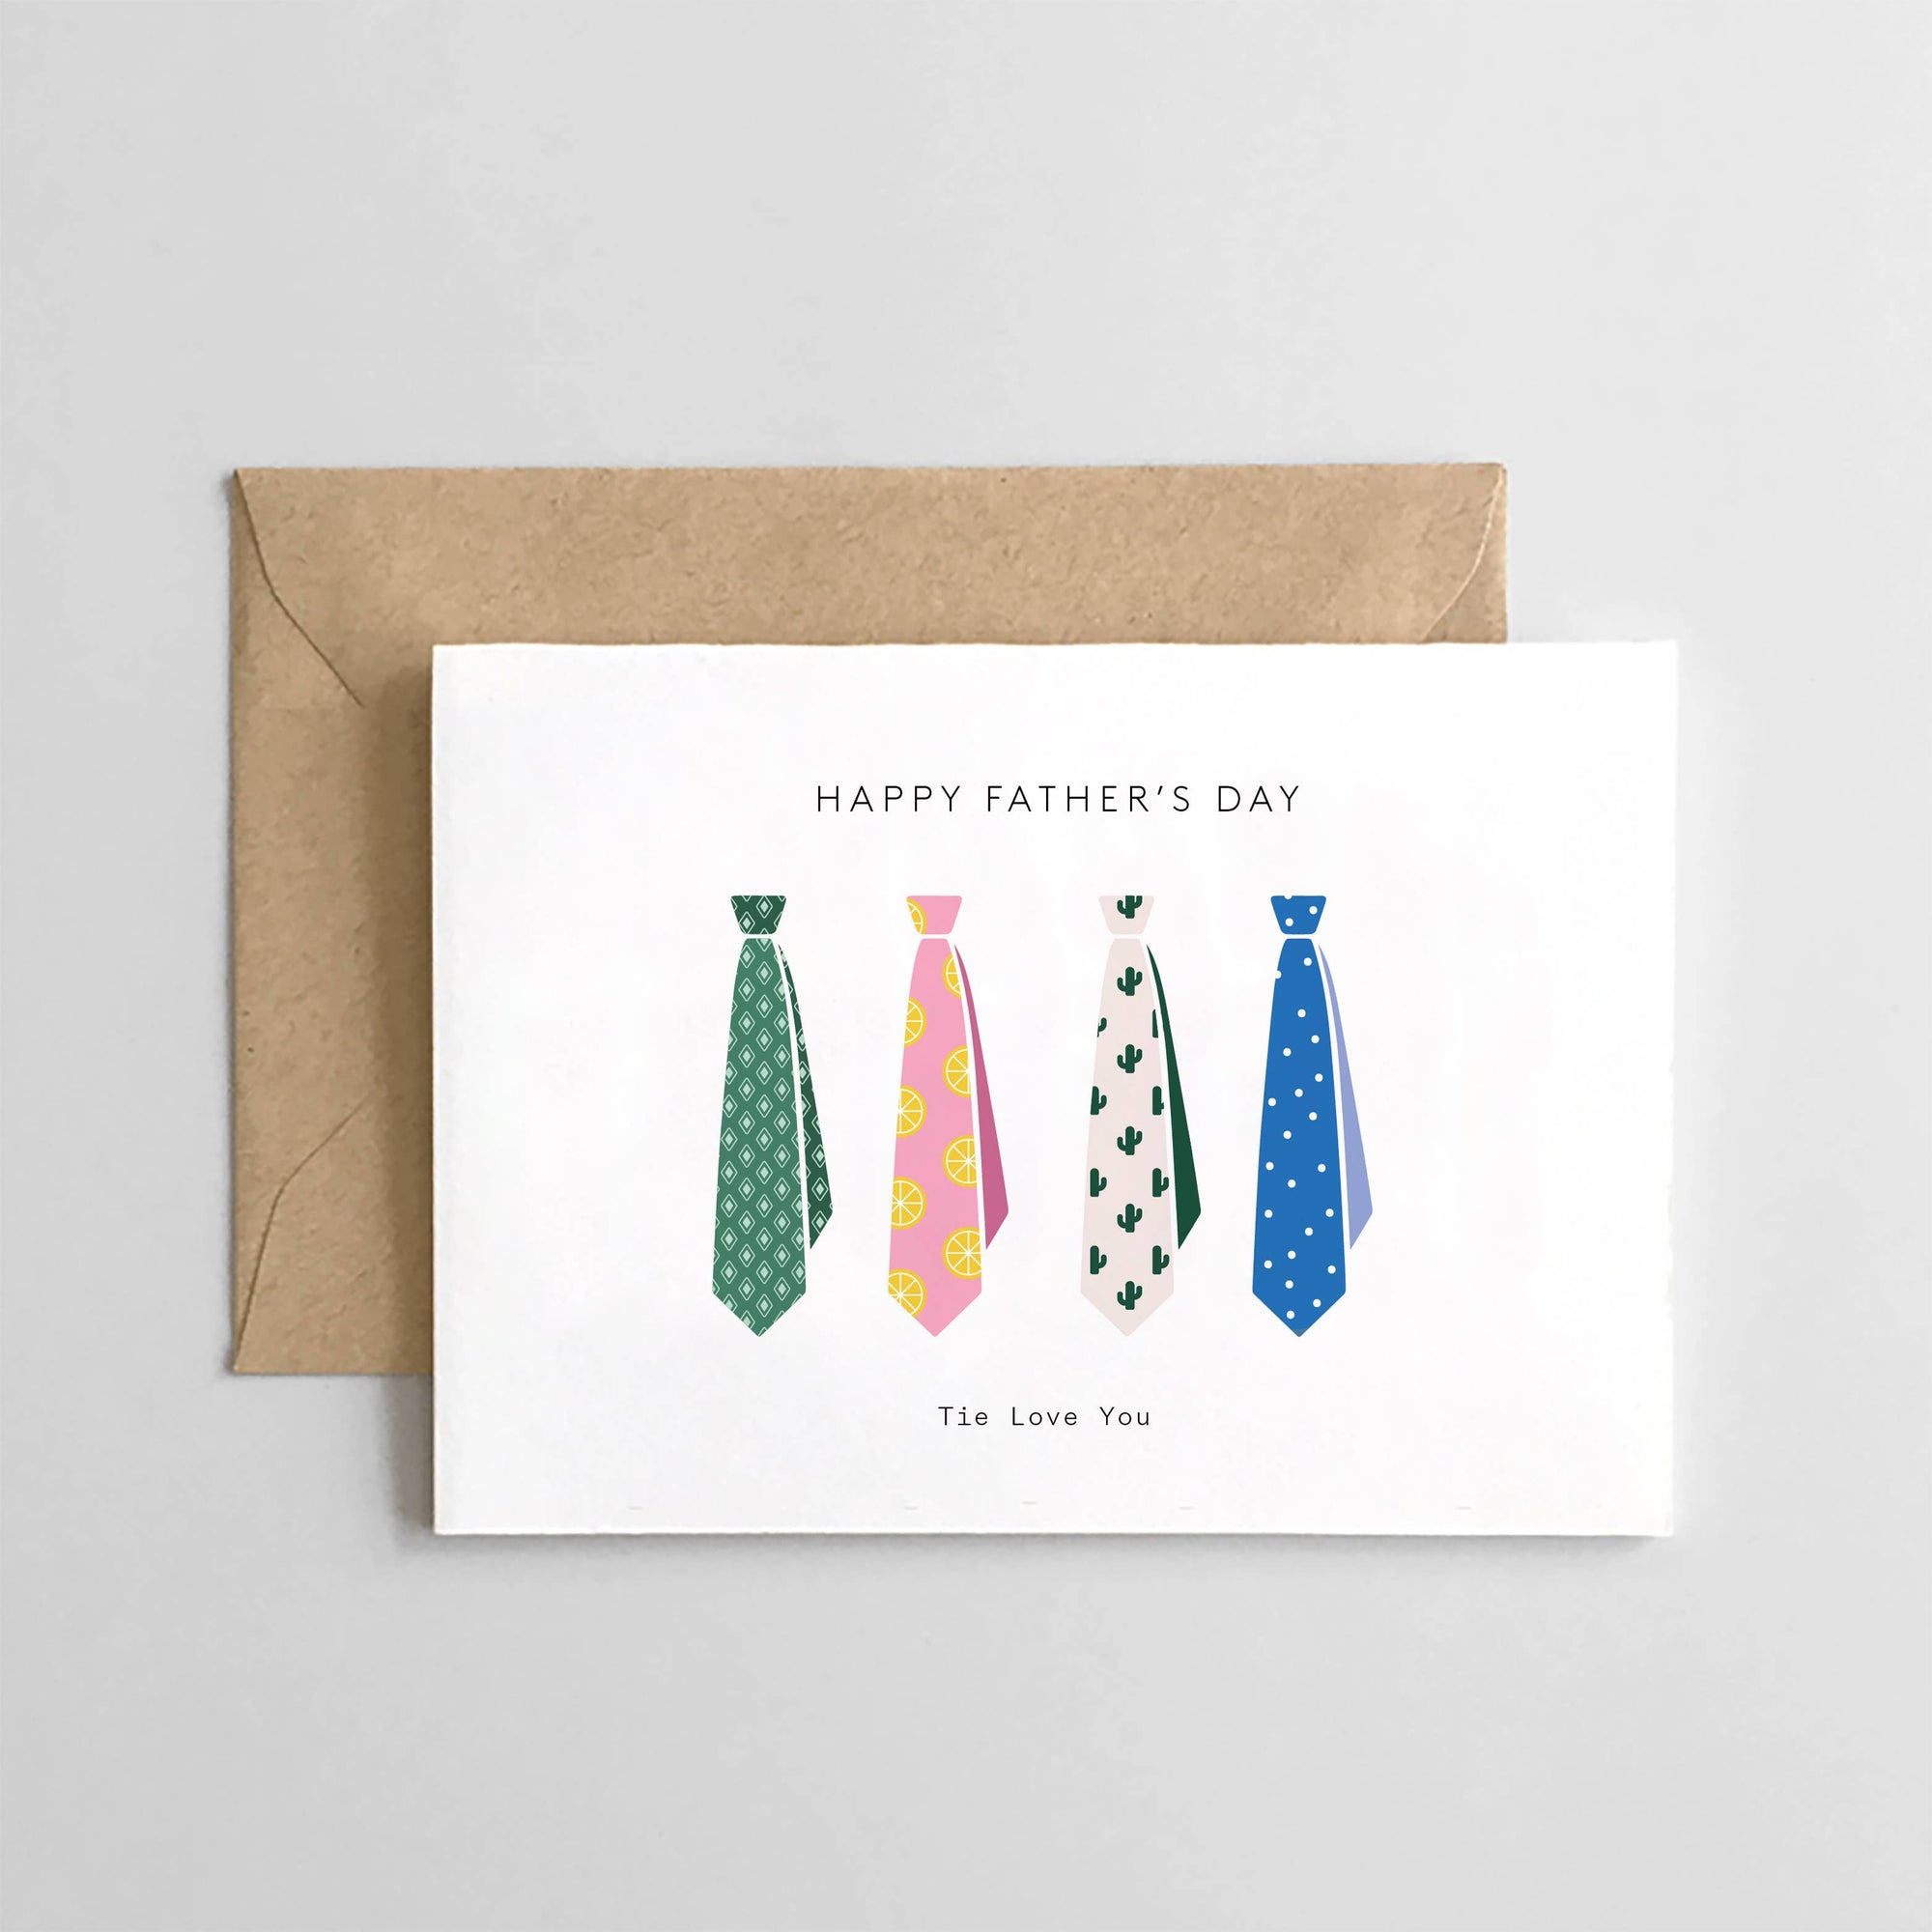 Tie Love You - Happy Father's Day